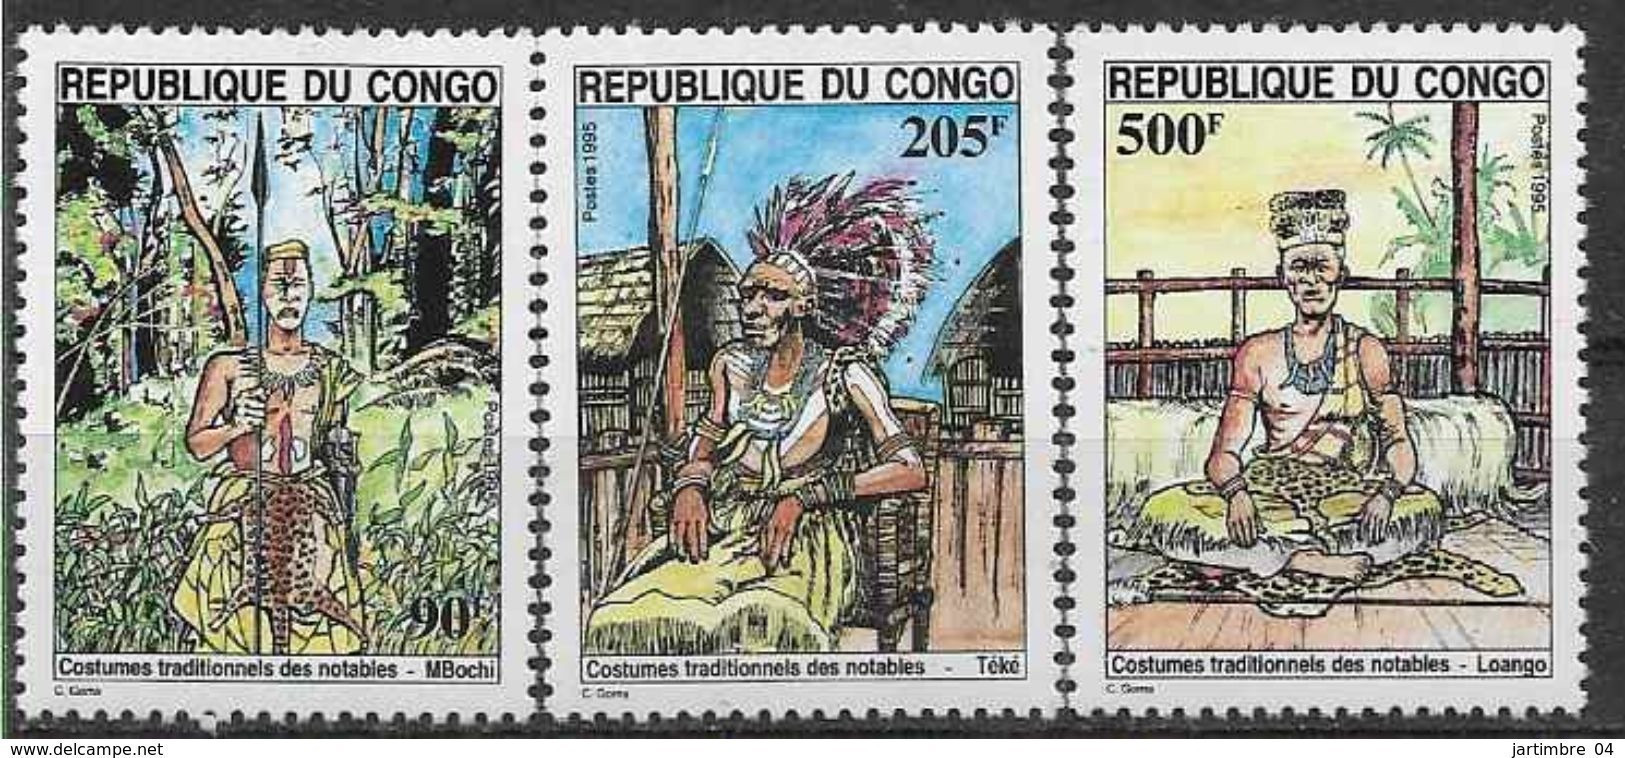 1995 CONGO Brazzaville 1001-03** Costumes, Coutumes - Mint/hinged